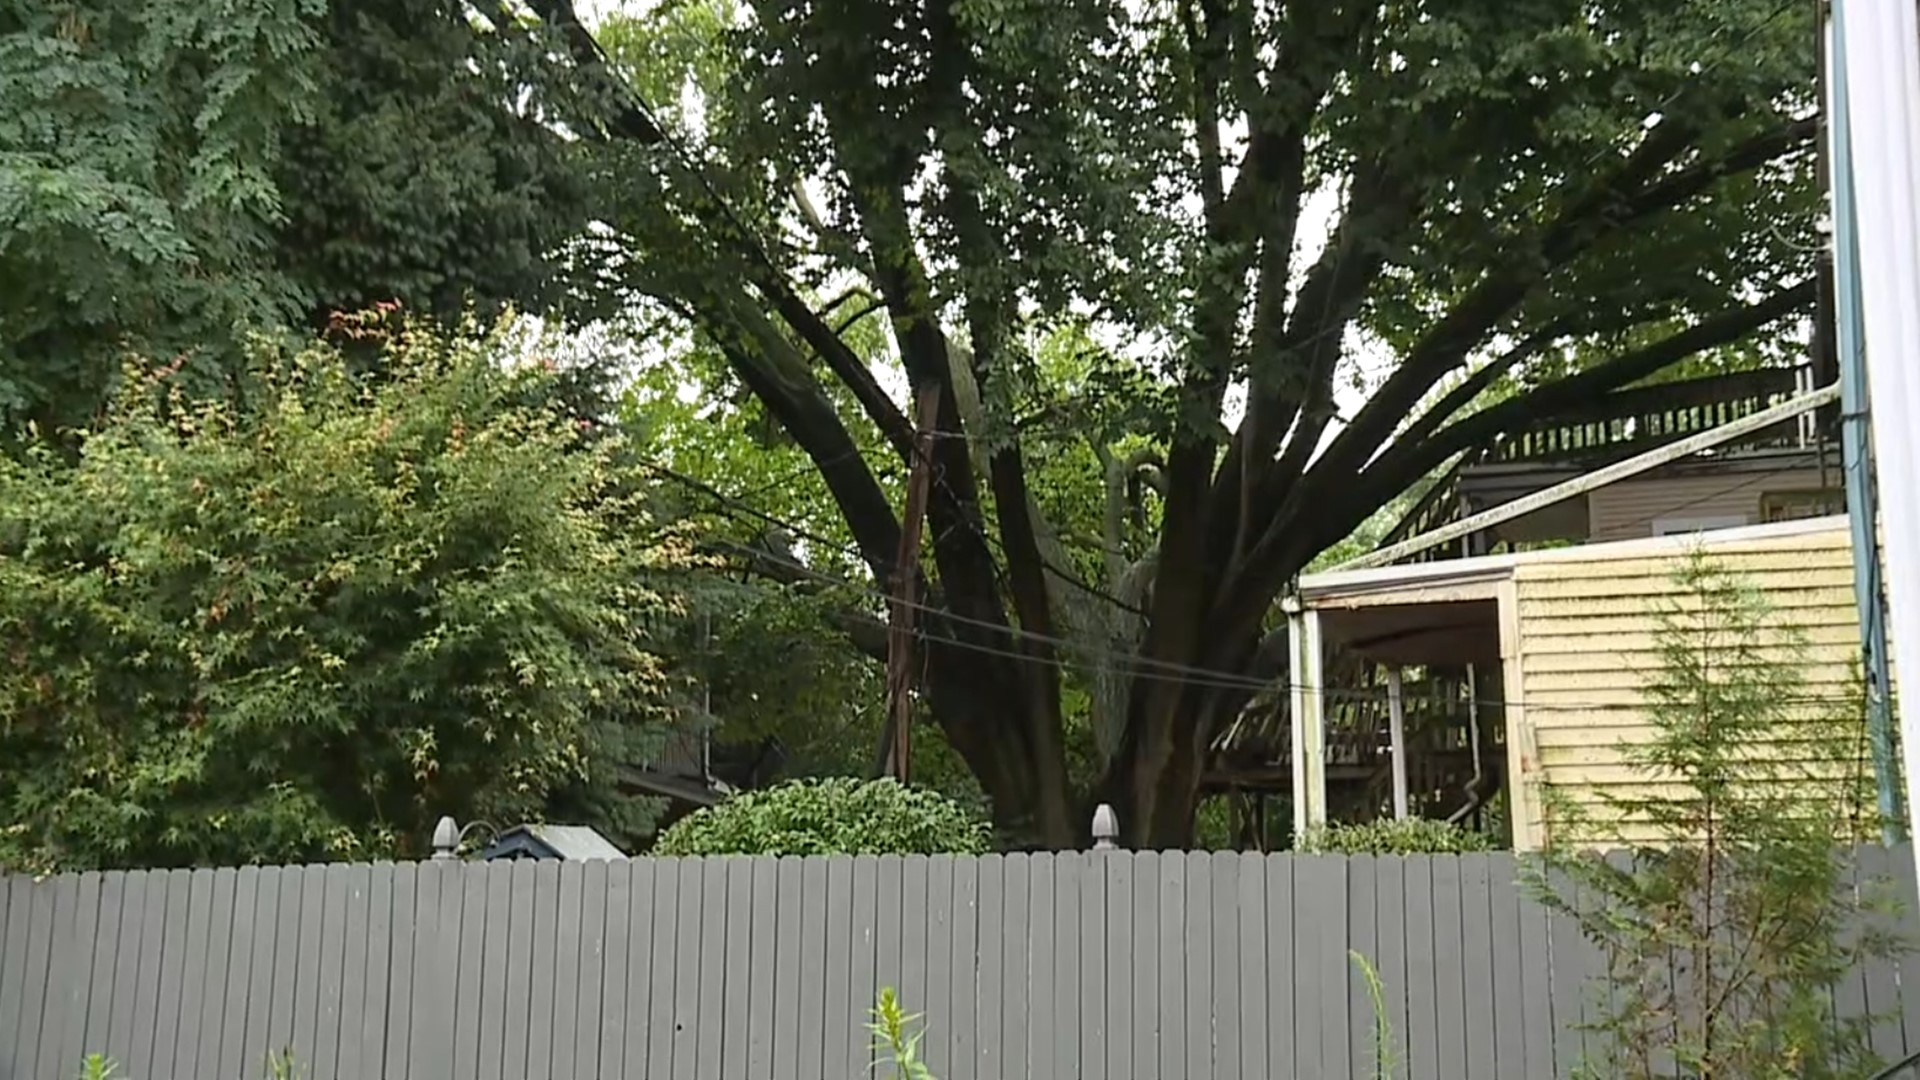 The removal of an 80-year-old Elm tree in Harrisburg is expected to take a week to complete and affect dozens of residents.